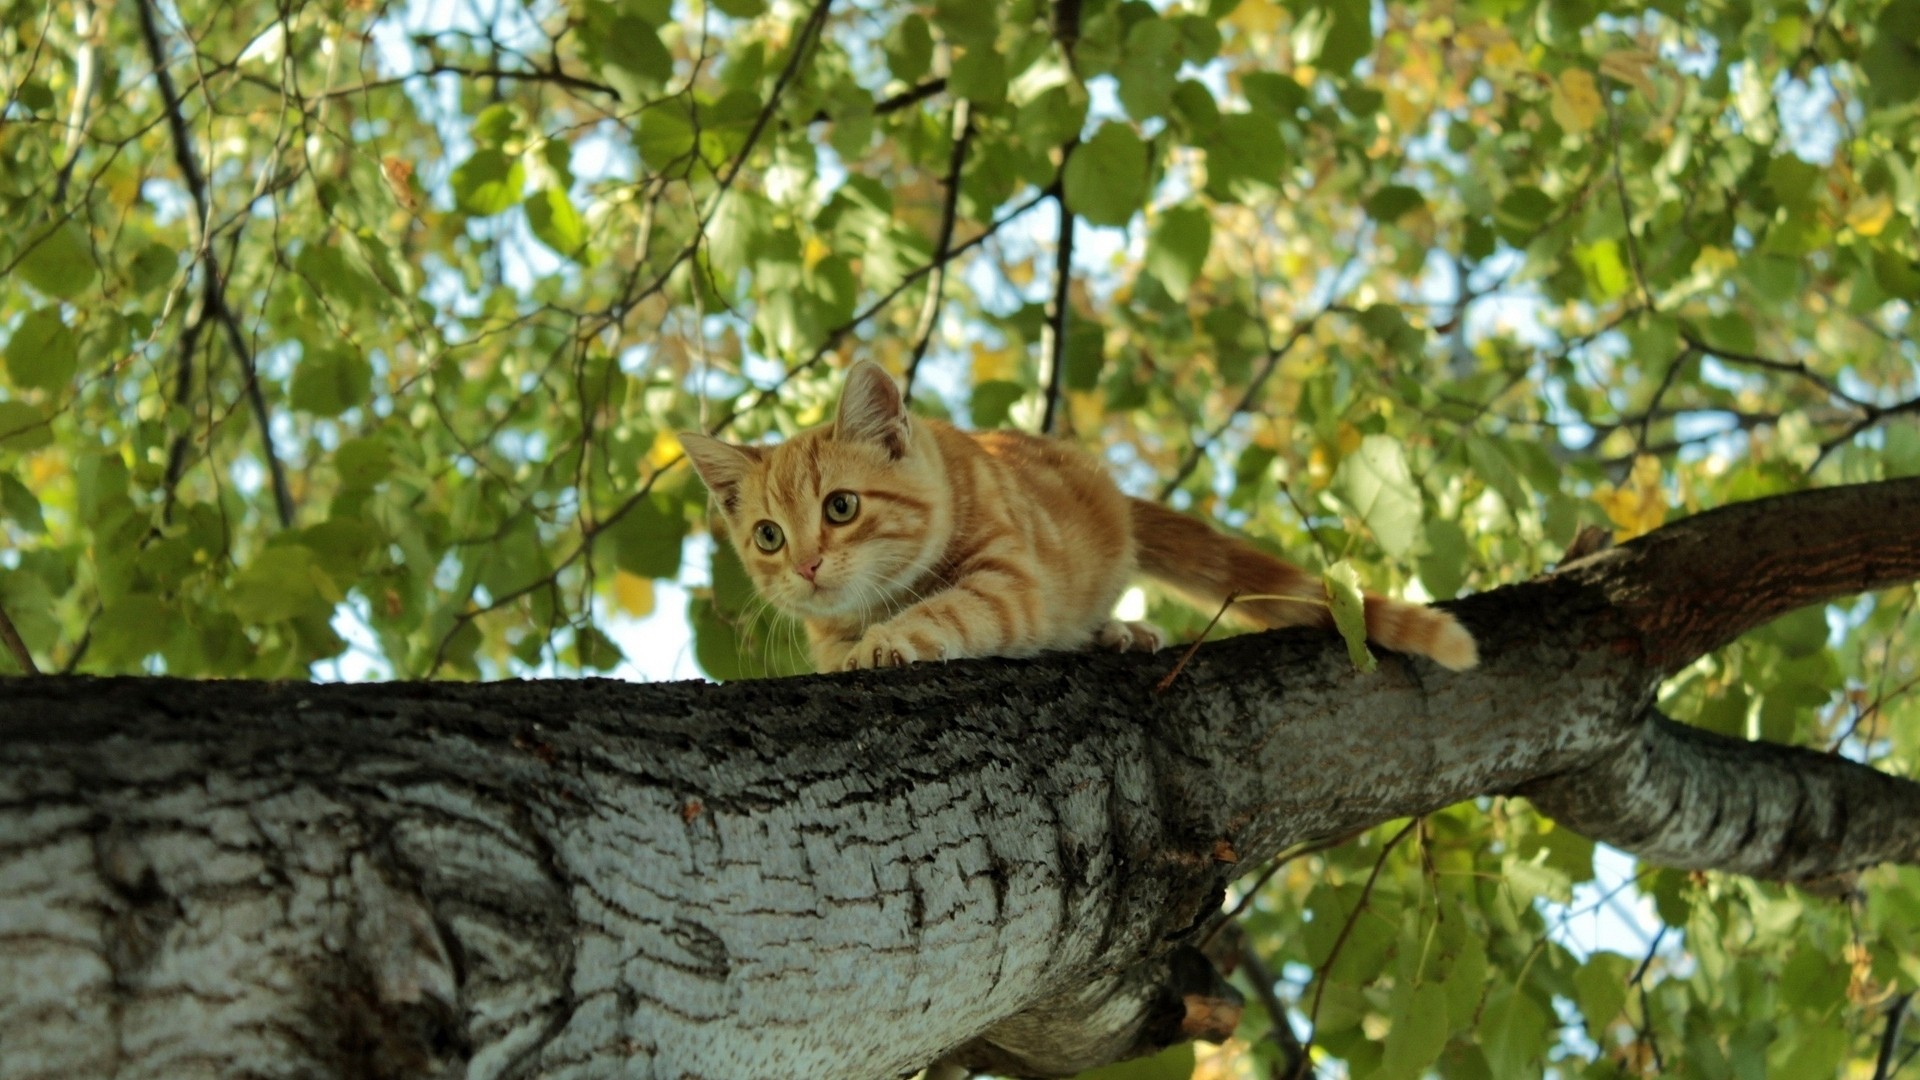 Animals Cats Trees Worms Eye View Low Angle Feline Mammals Climbing Tree Trunk Outdoors Nature 1920x1080